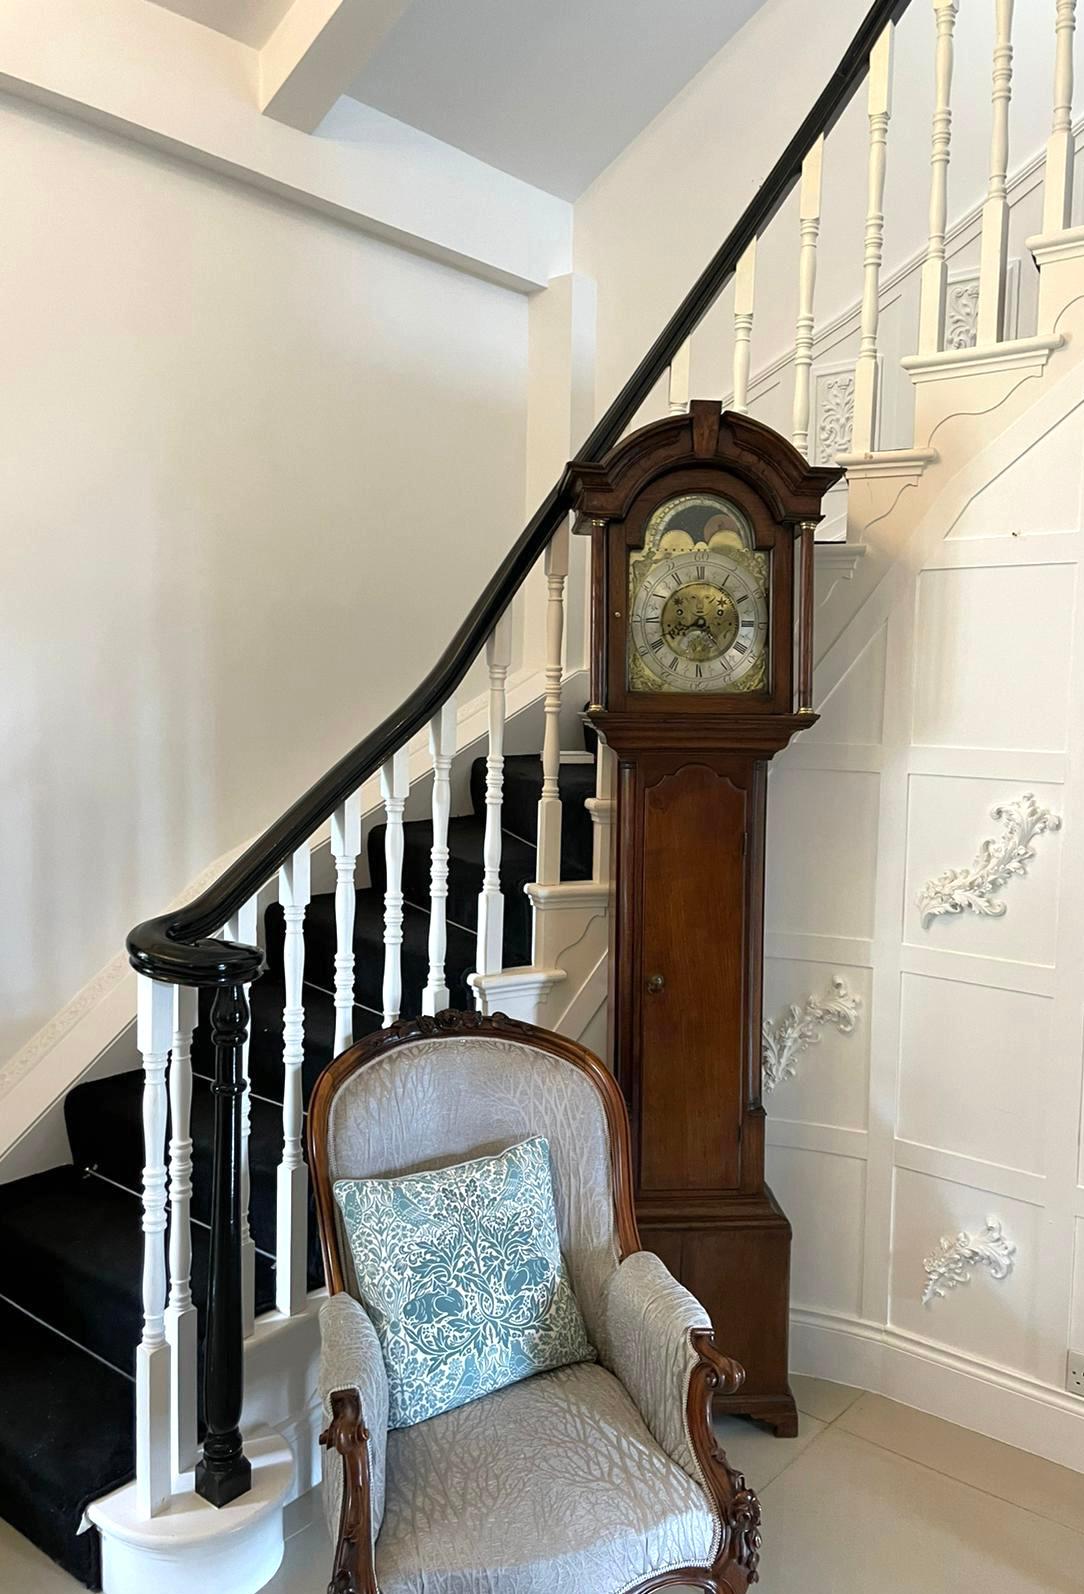 Antique George III quality brass face oak longcase clock by William Lister having a quality oak case with an arched top, two turned columns, arched glazed oak door opening to reveal a brass face with a silvered chapter ring, original hands and a